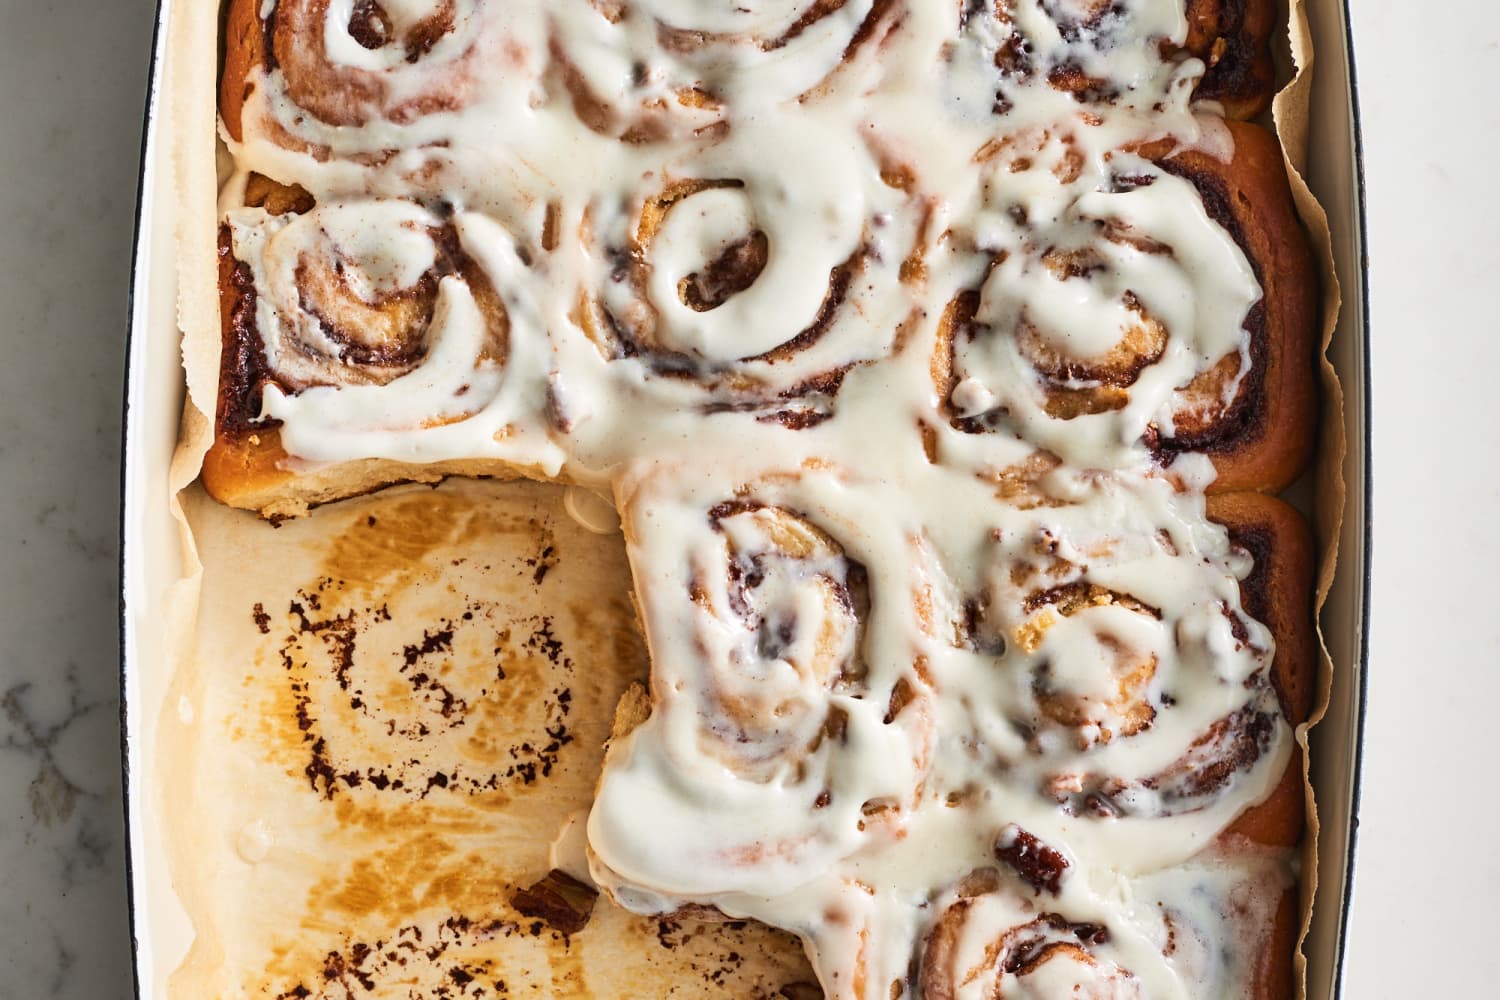 The $6 Frozen Cinnamon Rolls That Are (Almost) Better Than Homemade